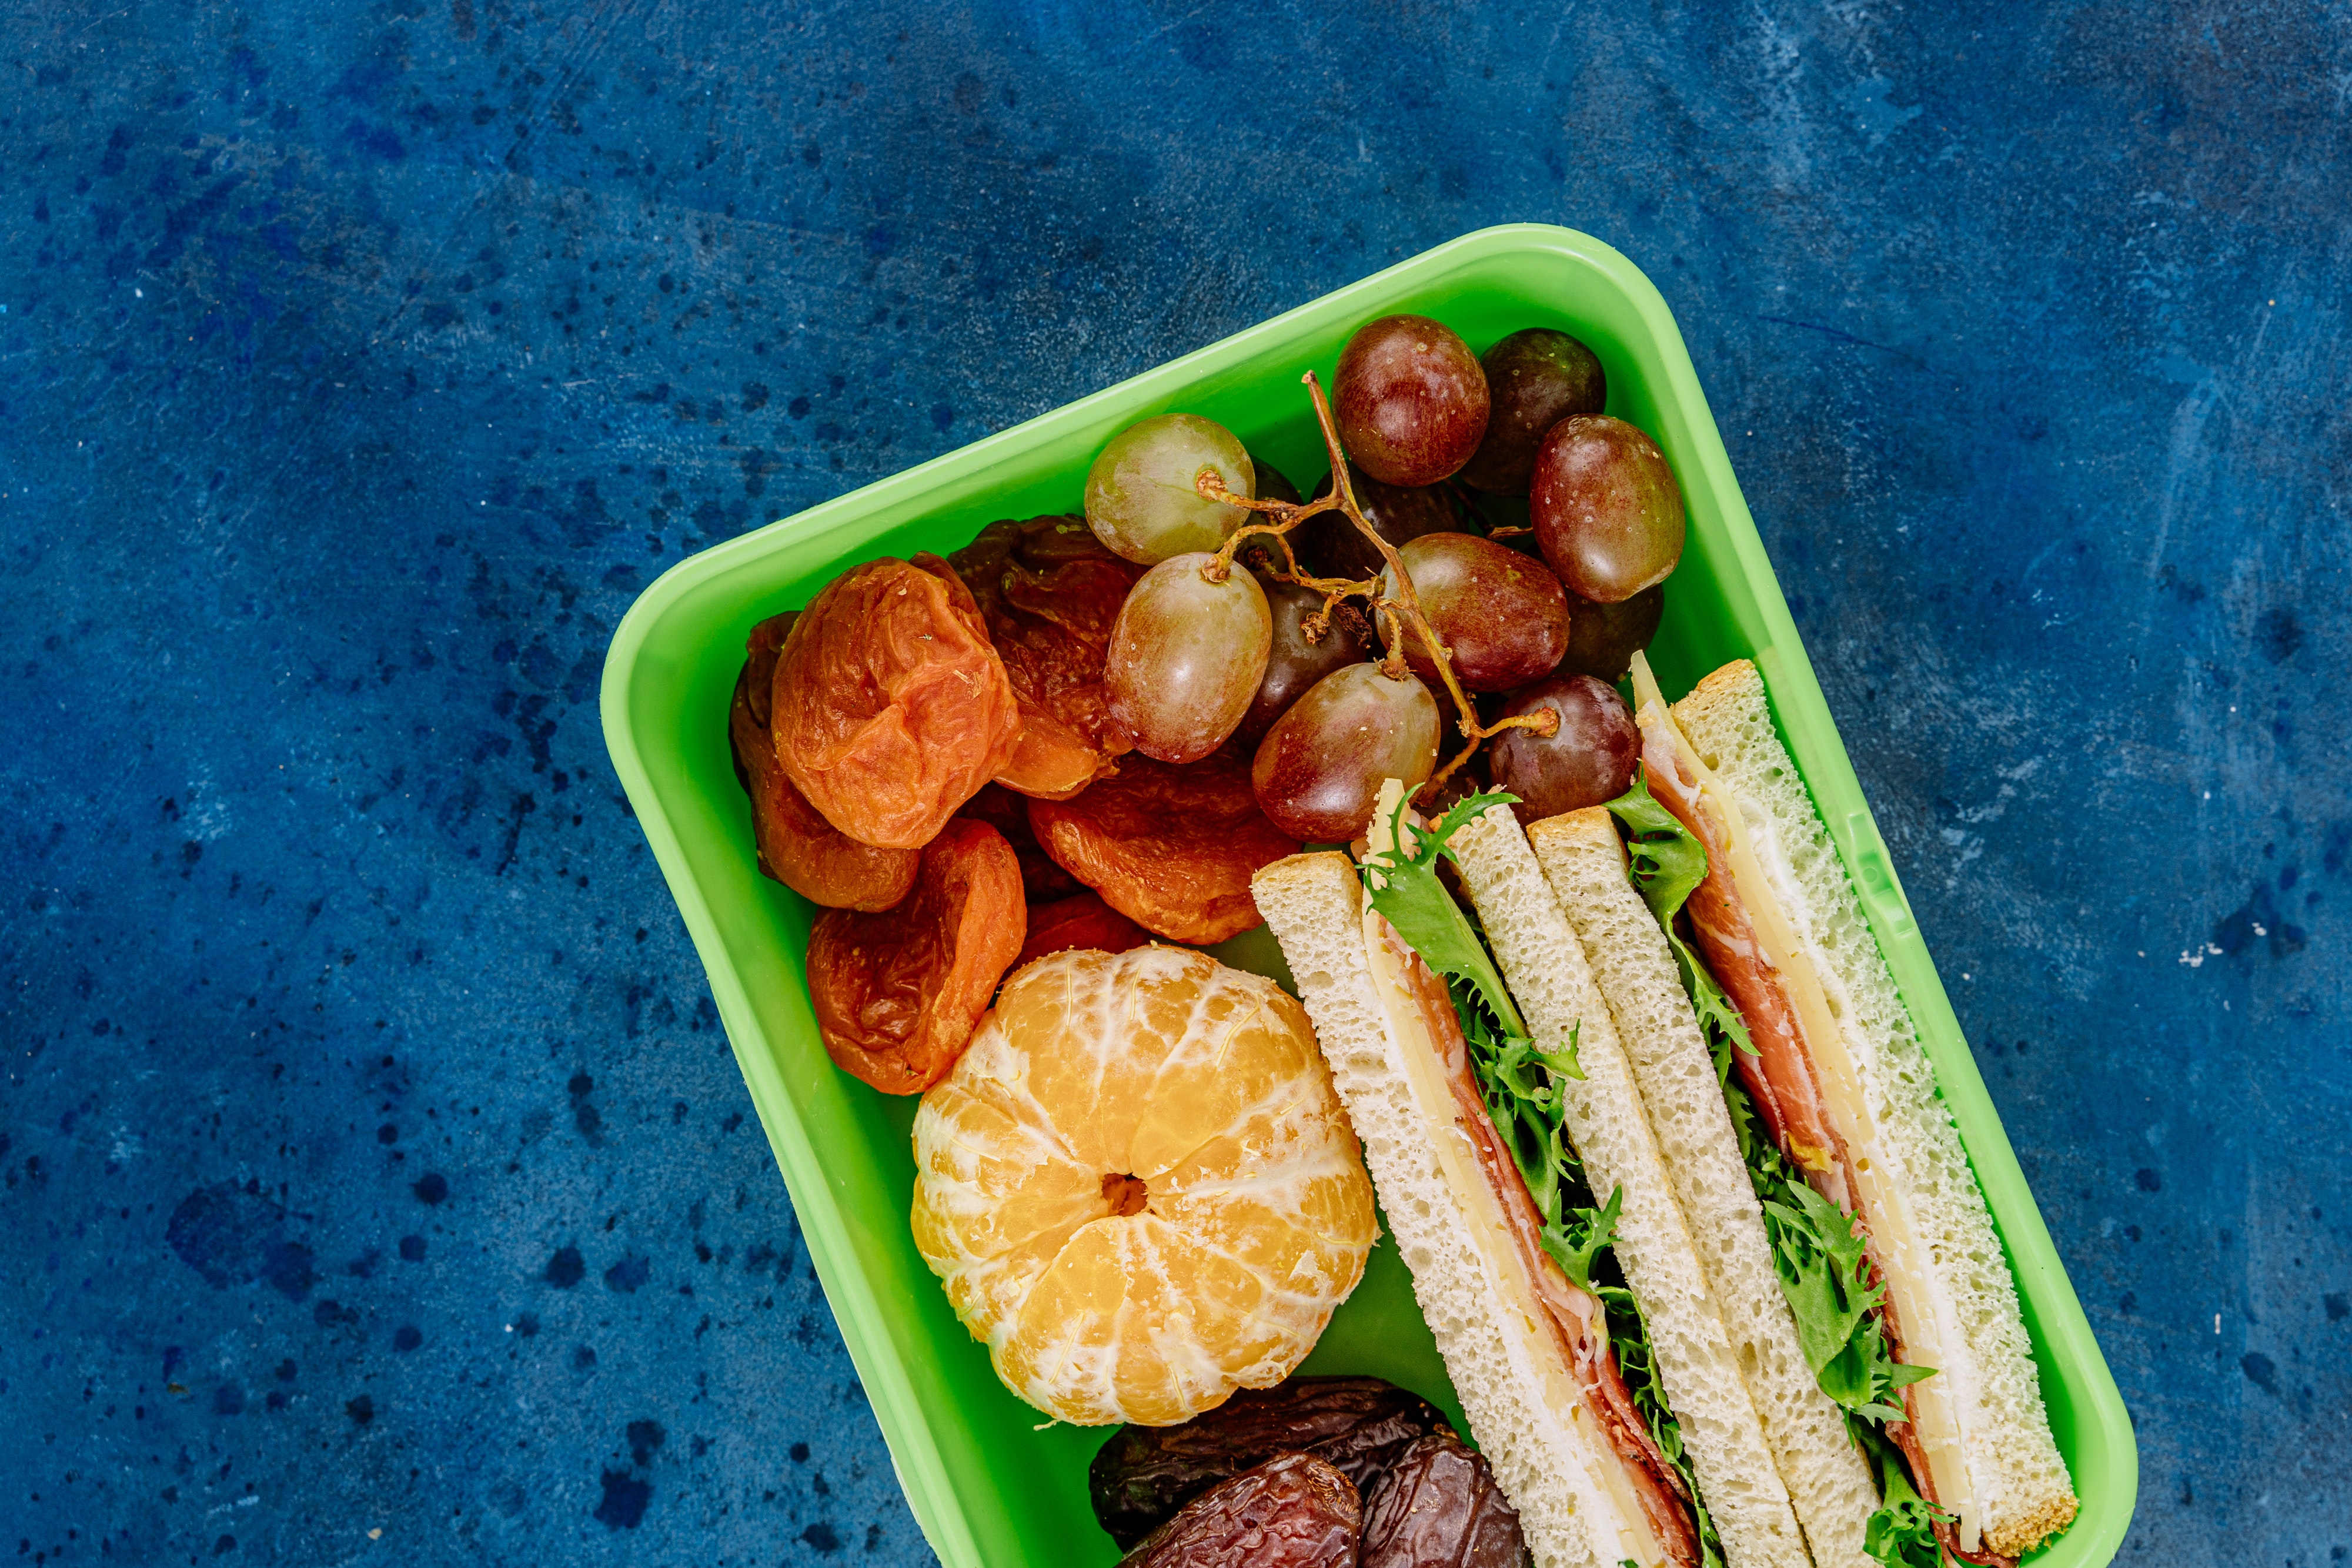 green lunch box with sandwich and fruit - illegal to put laxatives in someone's food